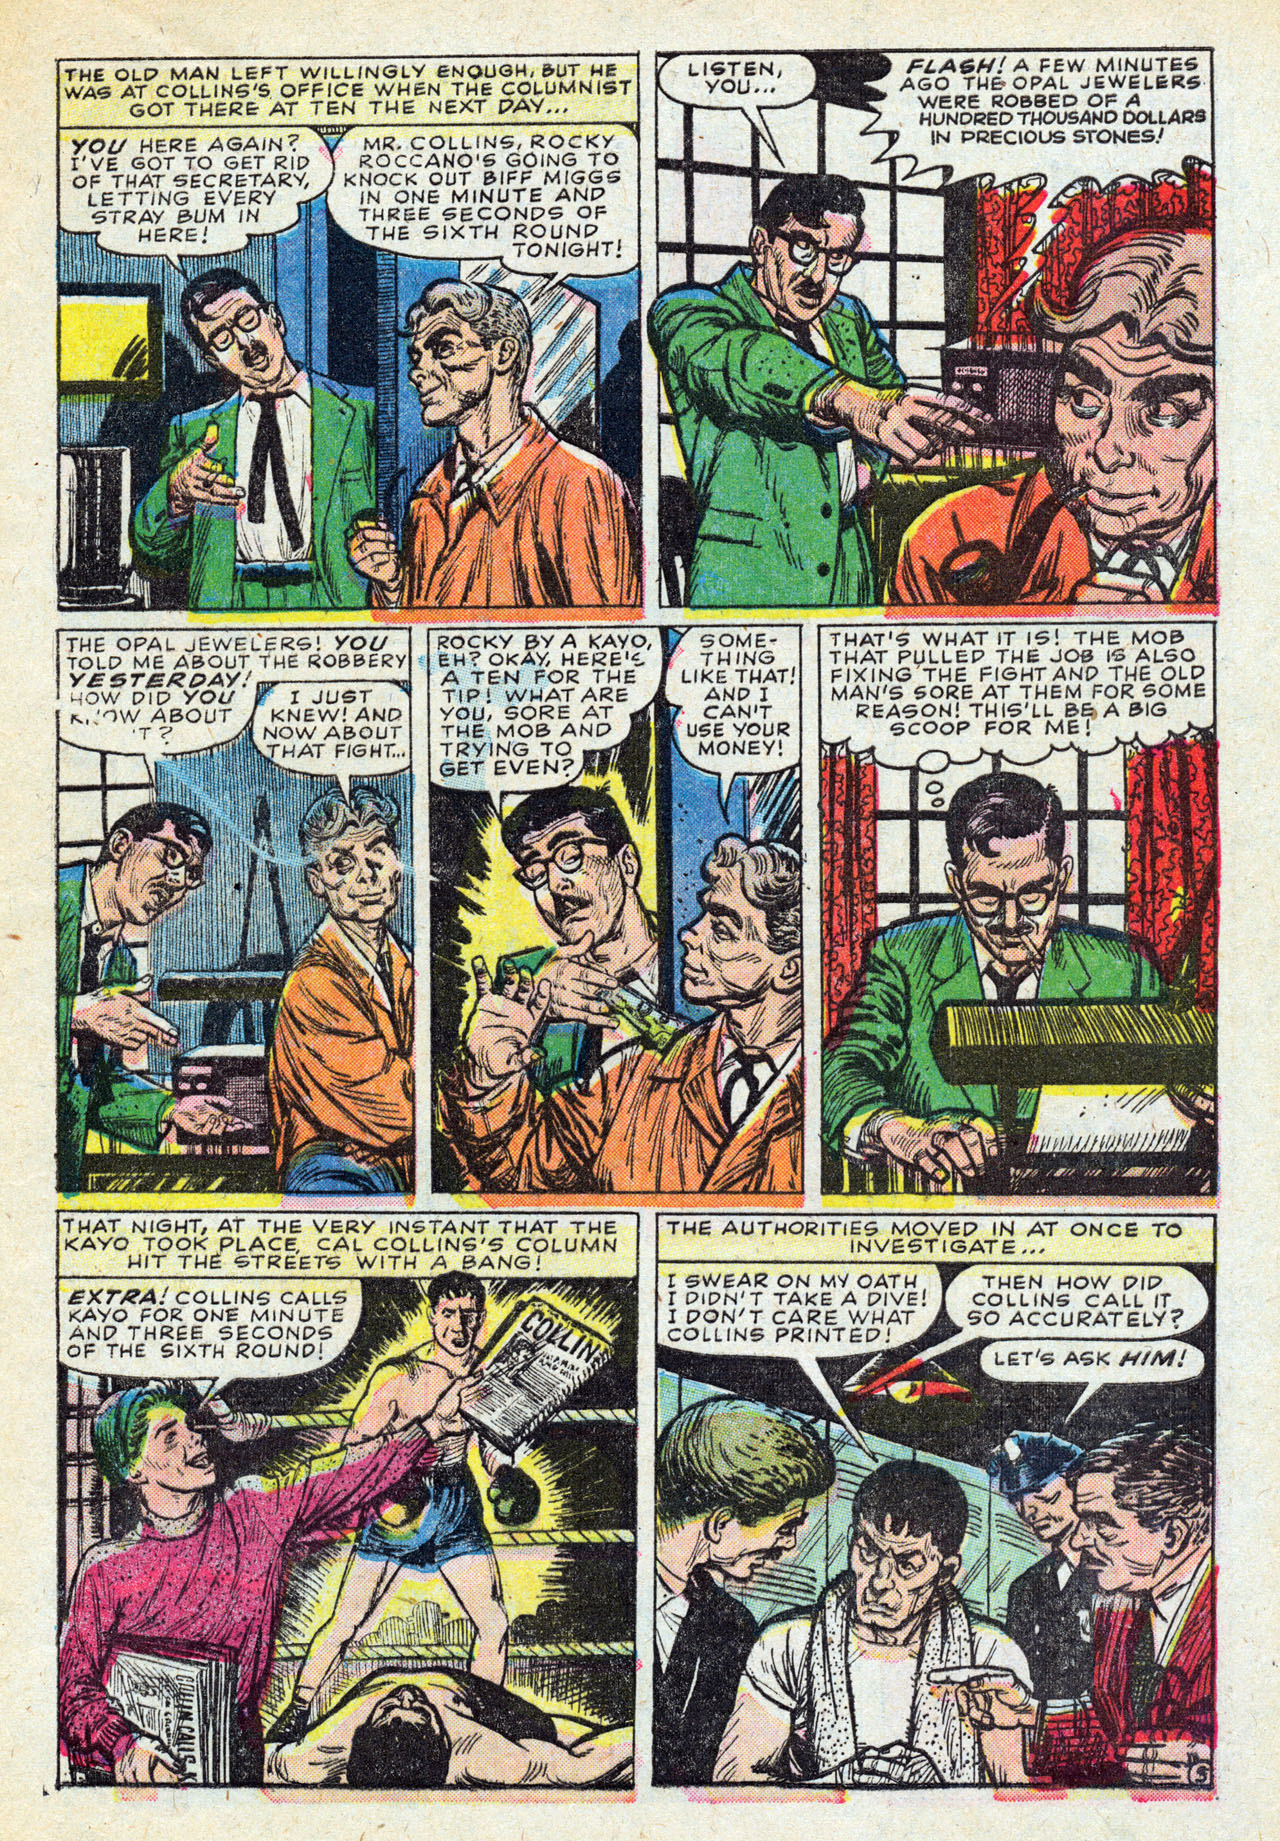 Marvel Tales (1949) 132 Page 4